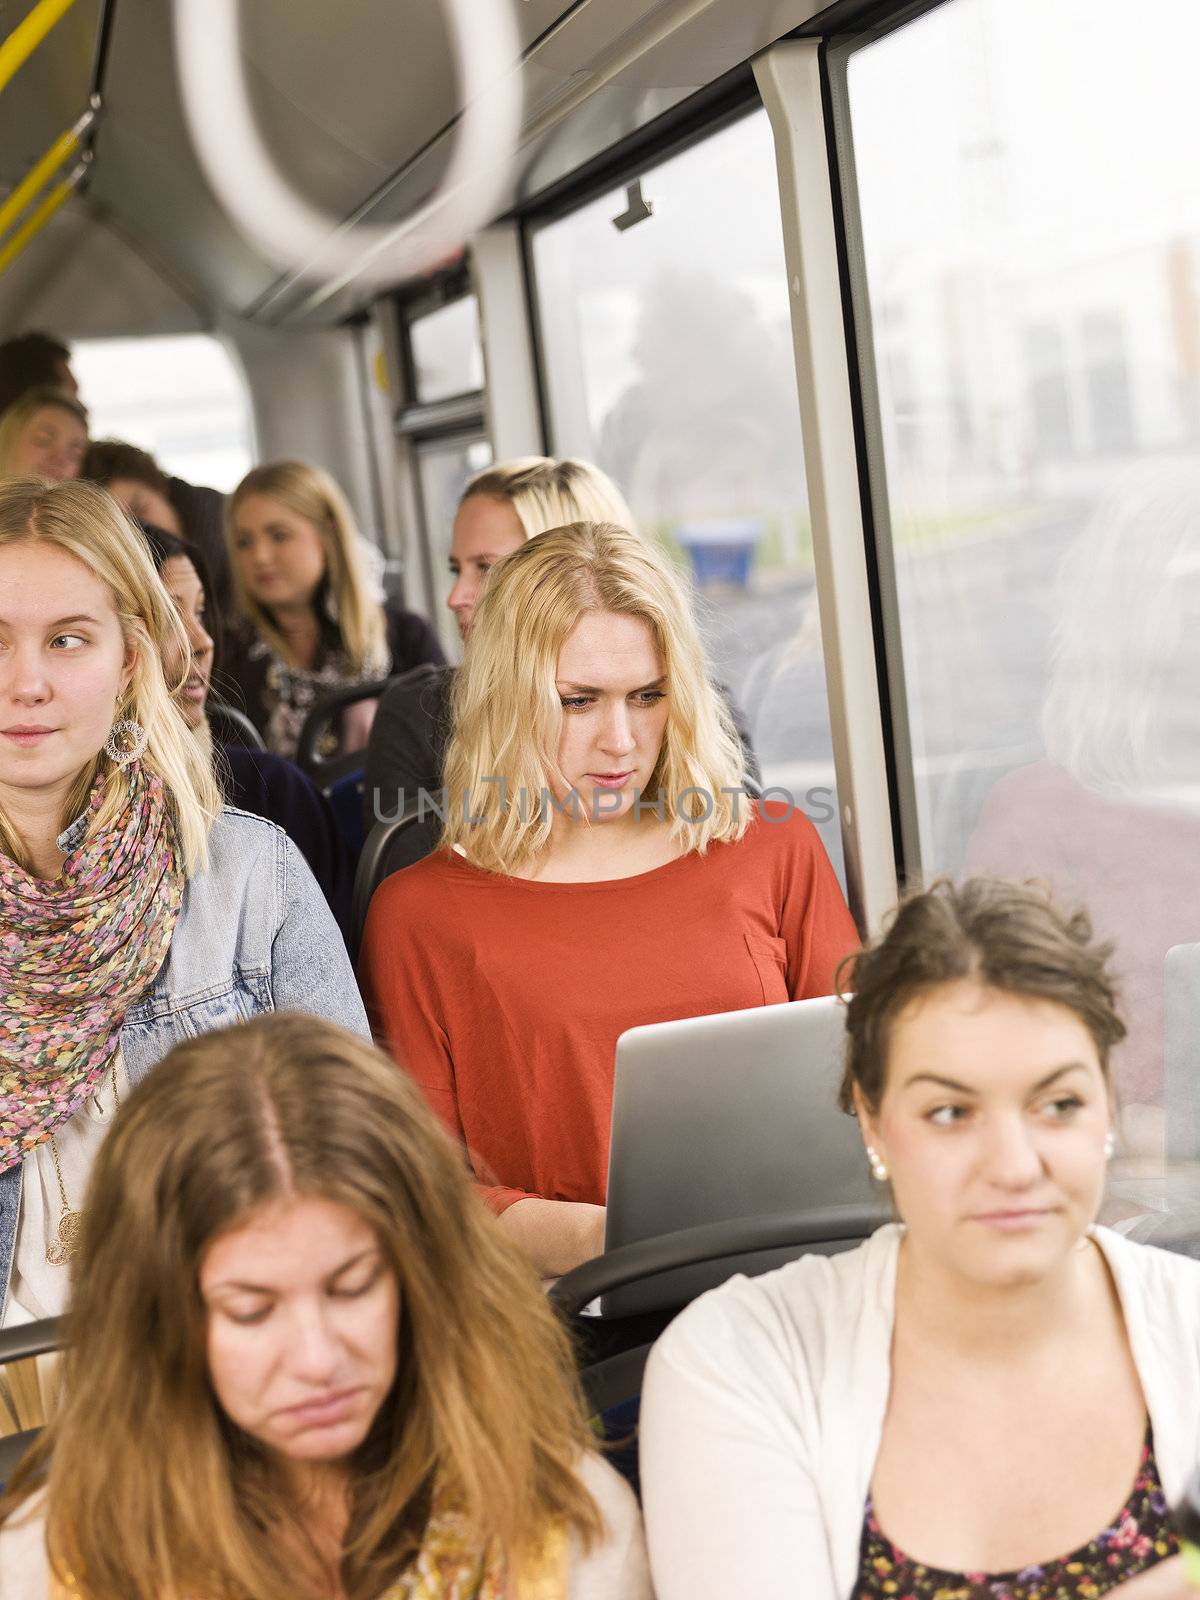 Serious woman on the bus with a computer